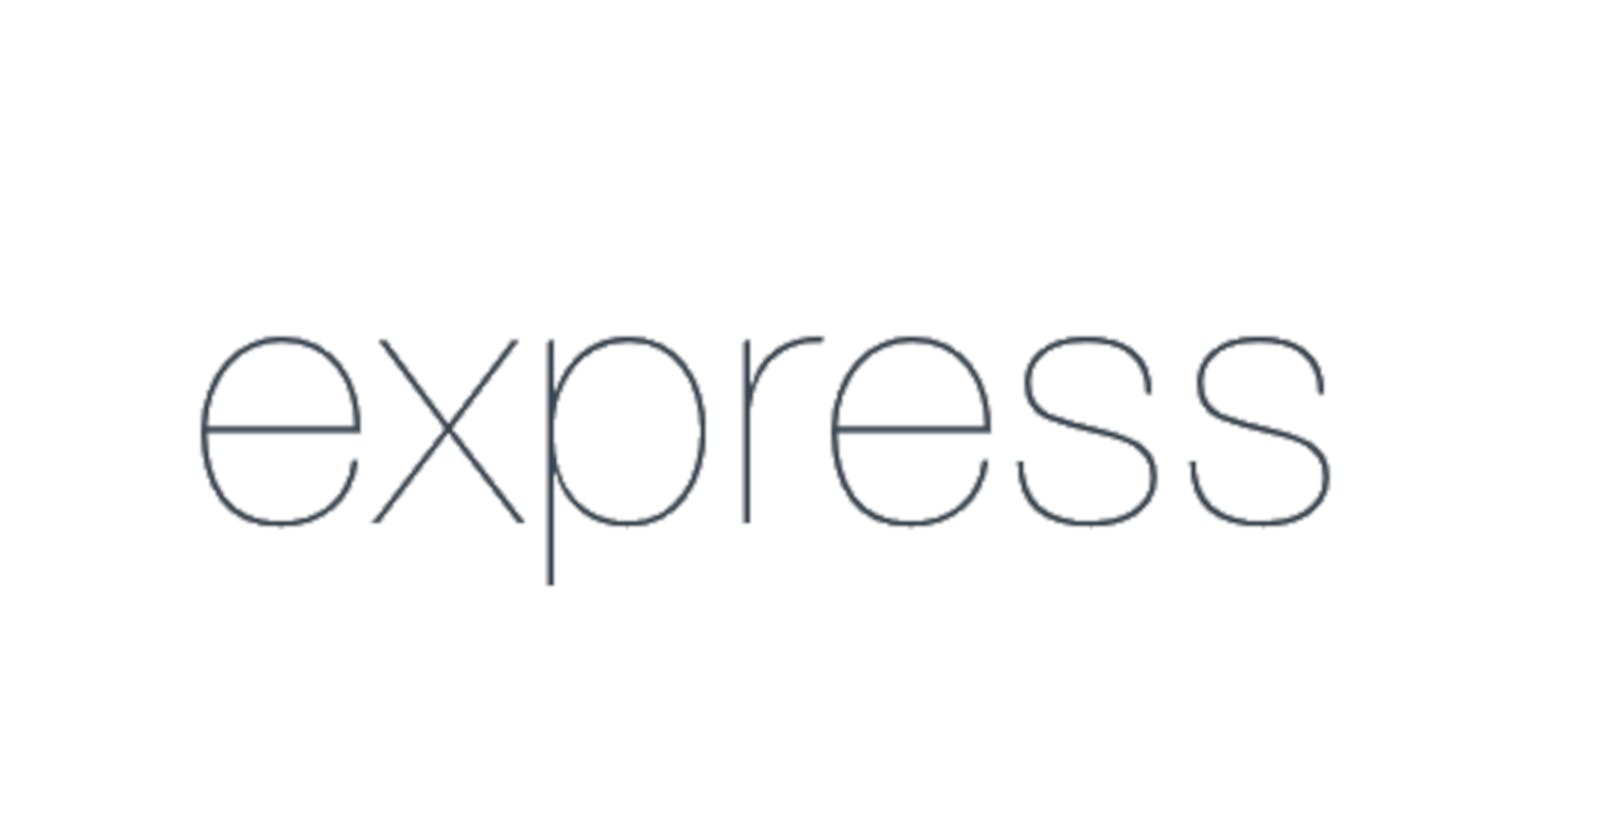 What Are Requests In Express?